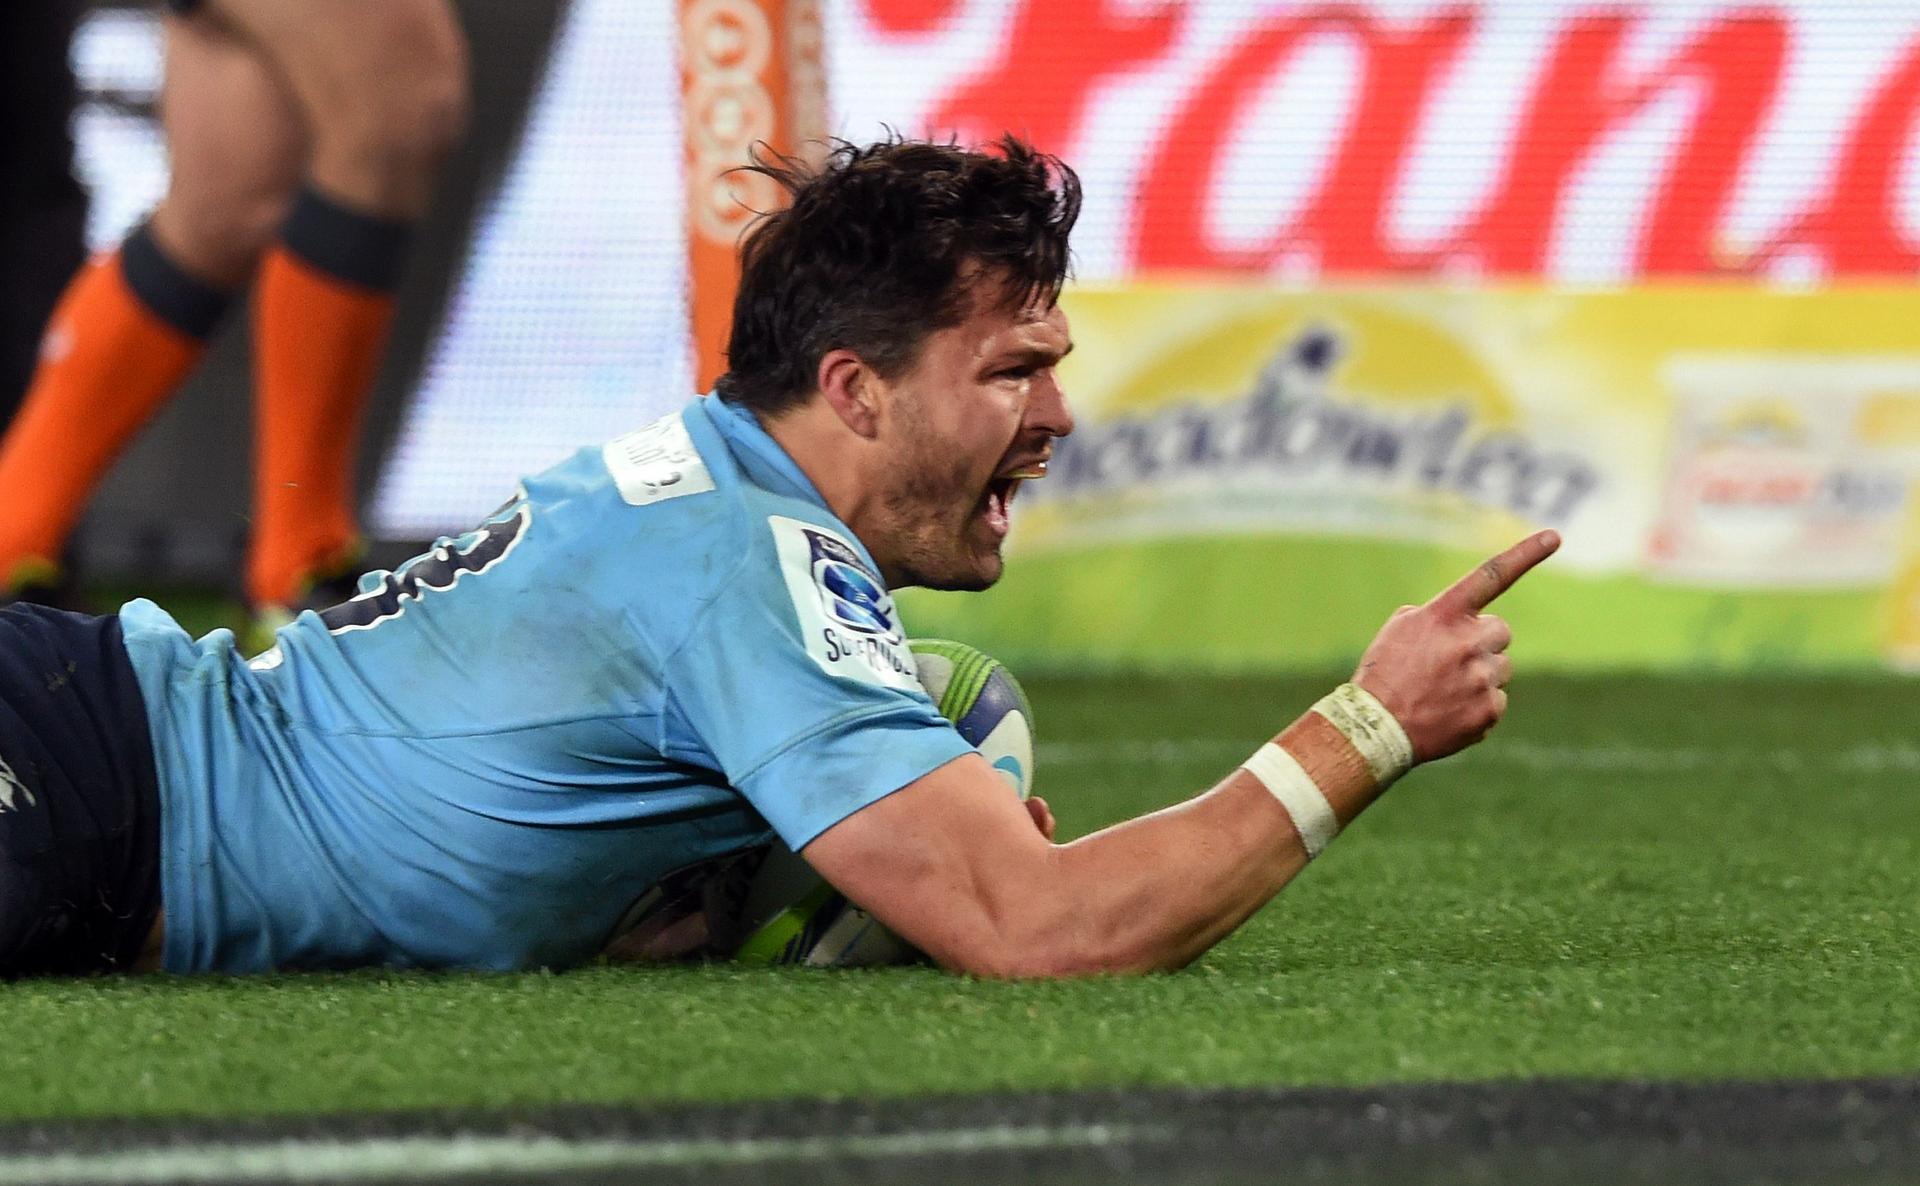 Waratahs vice-captain Adam Ashley-Cooper, who scored a brace against the Crusaders, will be key to the Wallabies’ success this season. Photo: AFP